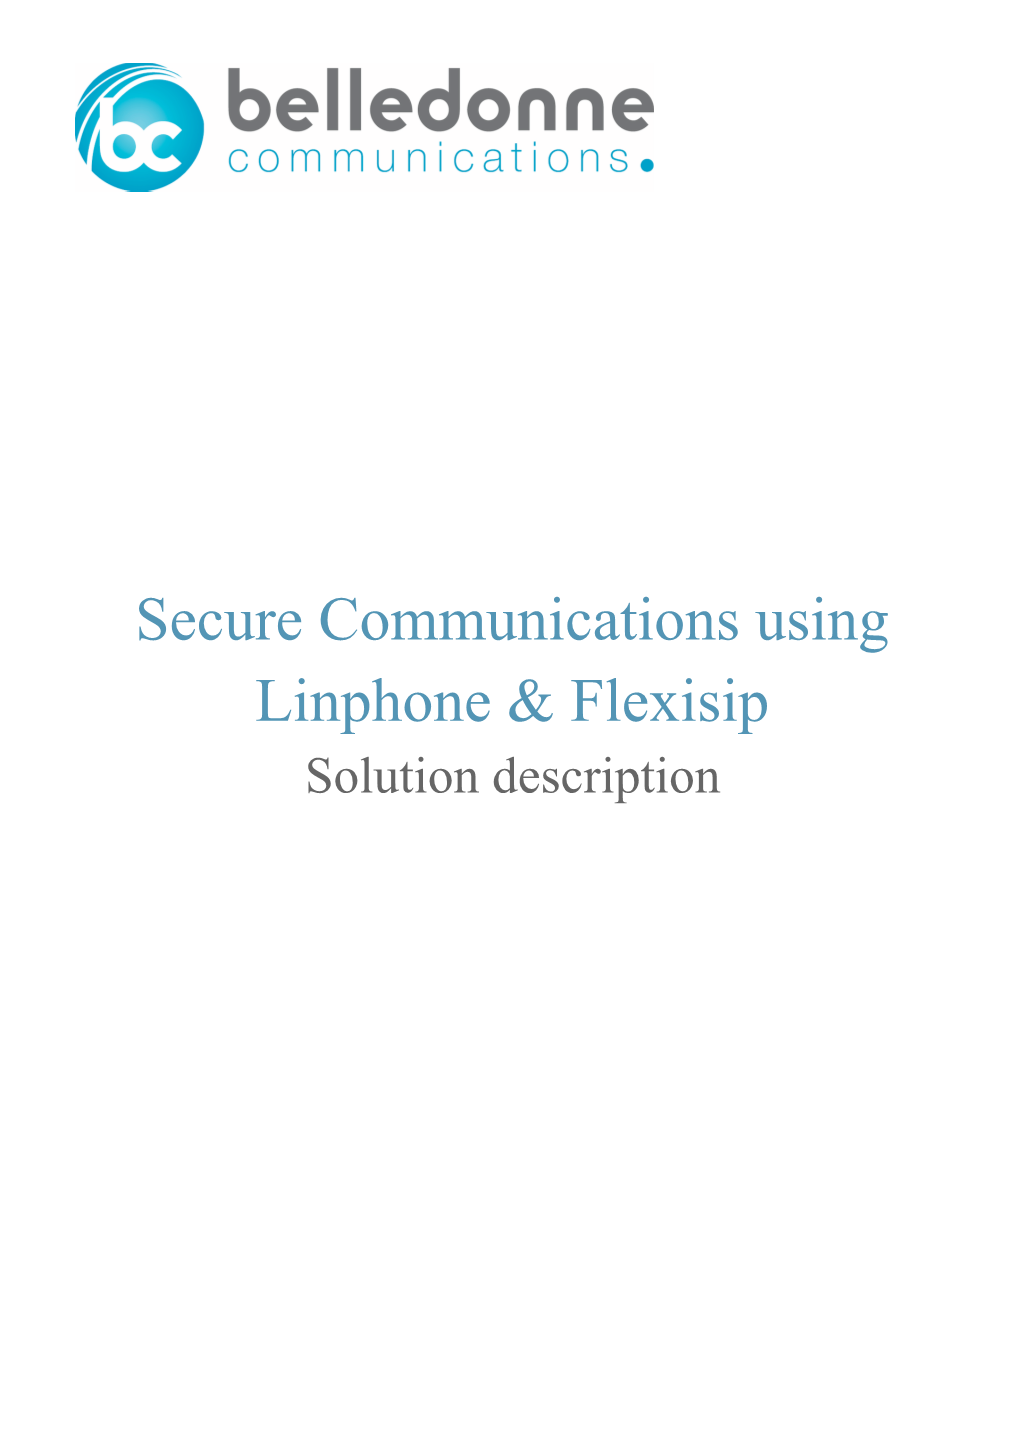 Secure Communications Using Linphone & Flexisip